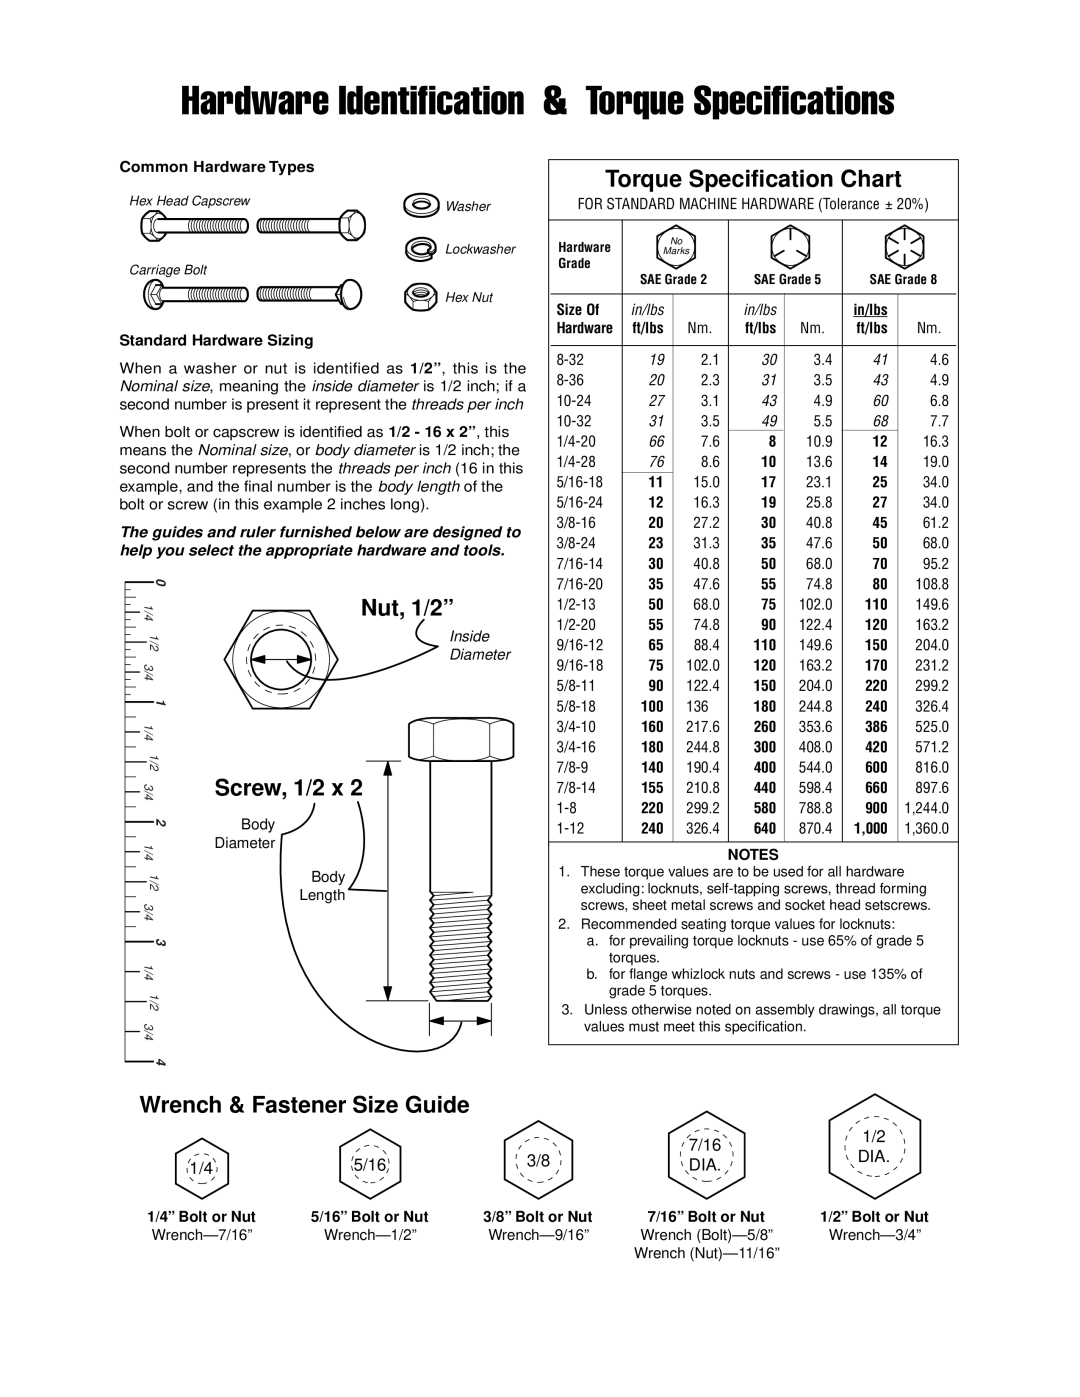 Simplicity 2600 Series Wrench & Fastener Size Guide, Hardware Identification & Torque Specifications, Nut, 1/2”, 7/16 